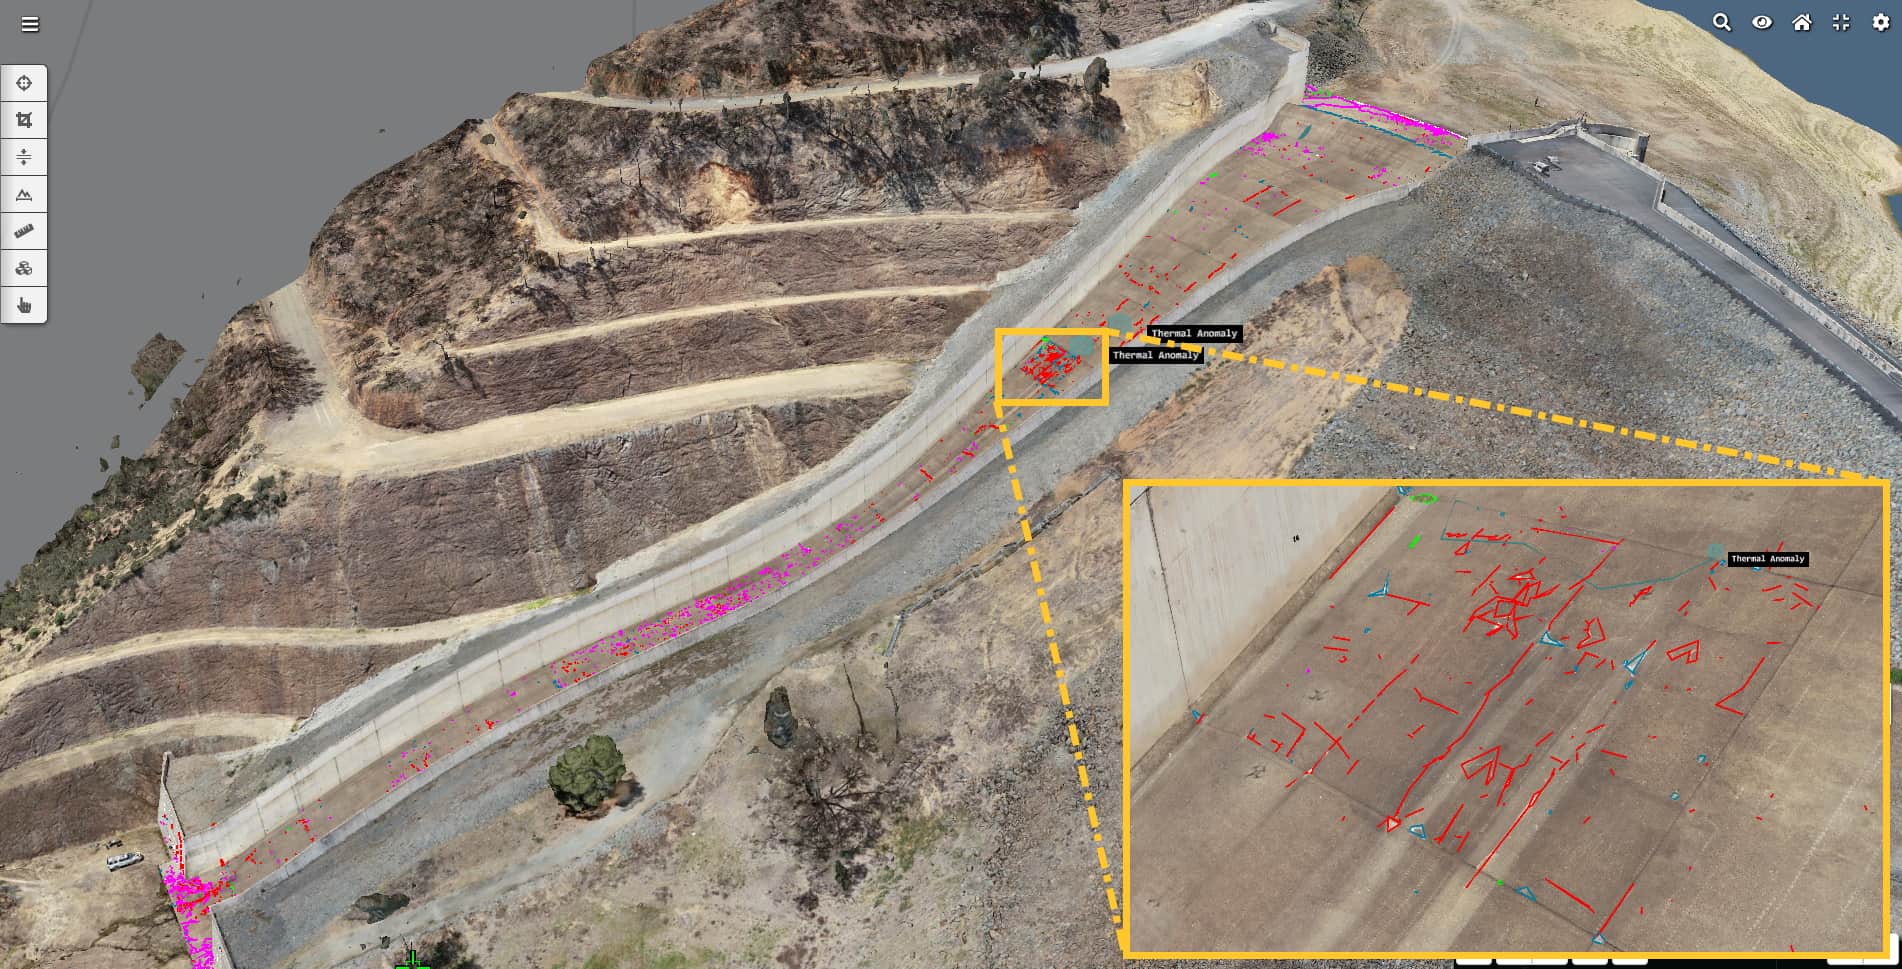 digital engineering services include digital inspection of dam spillway using 3D modelling